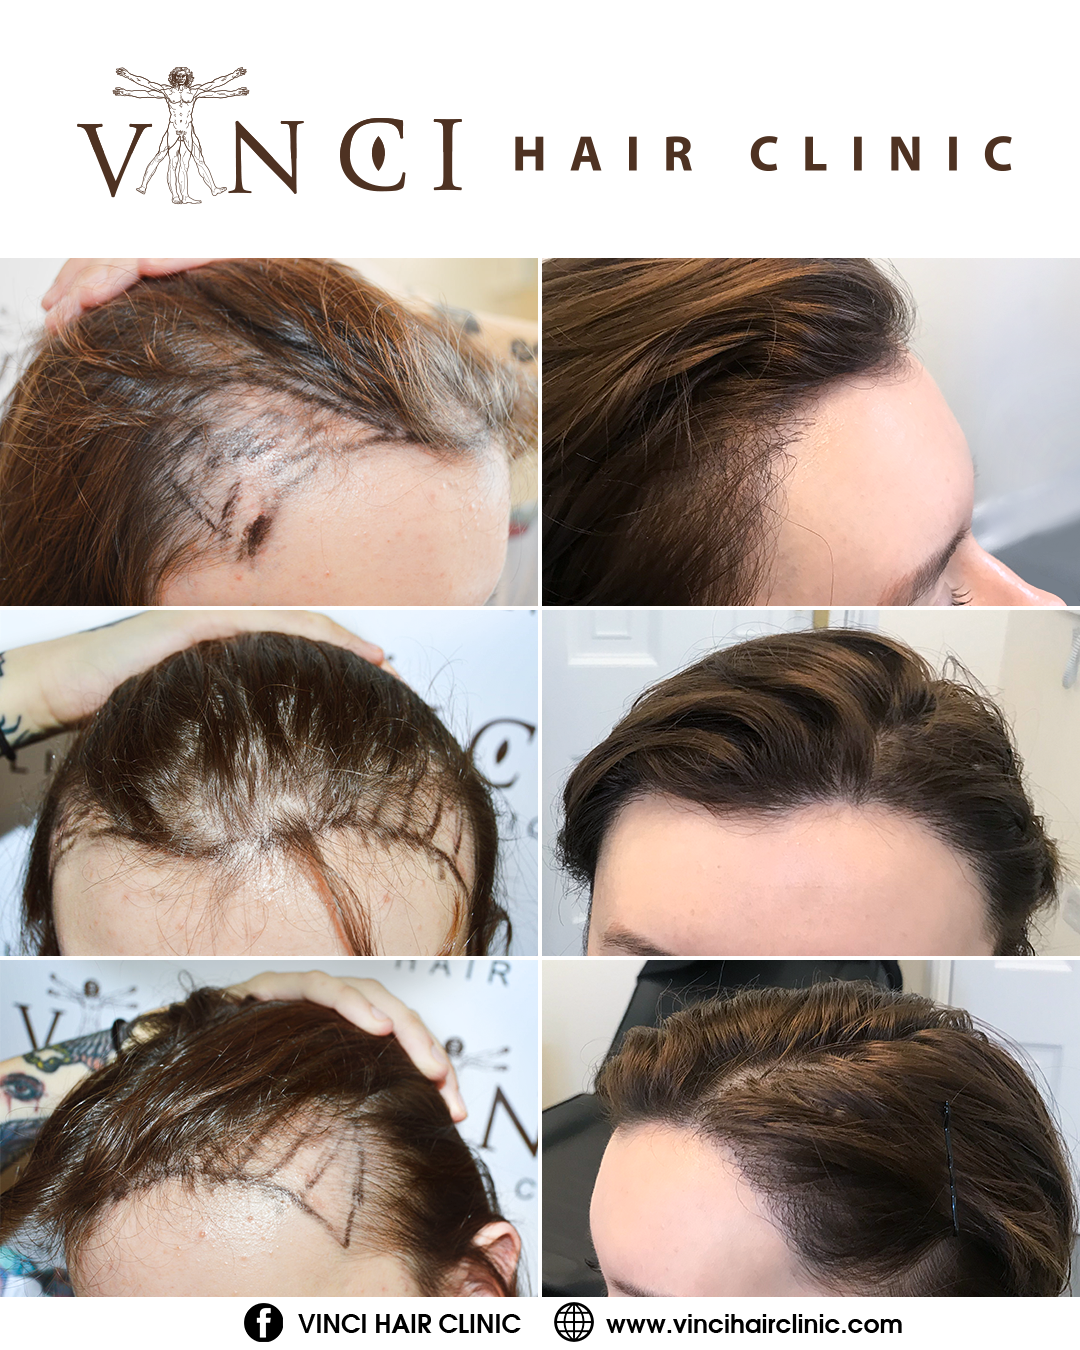 It's Time to Talk About Female Hair Loss – Vinci Hair Clinic